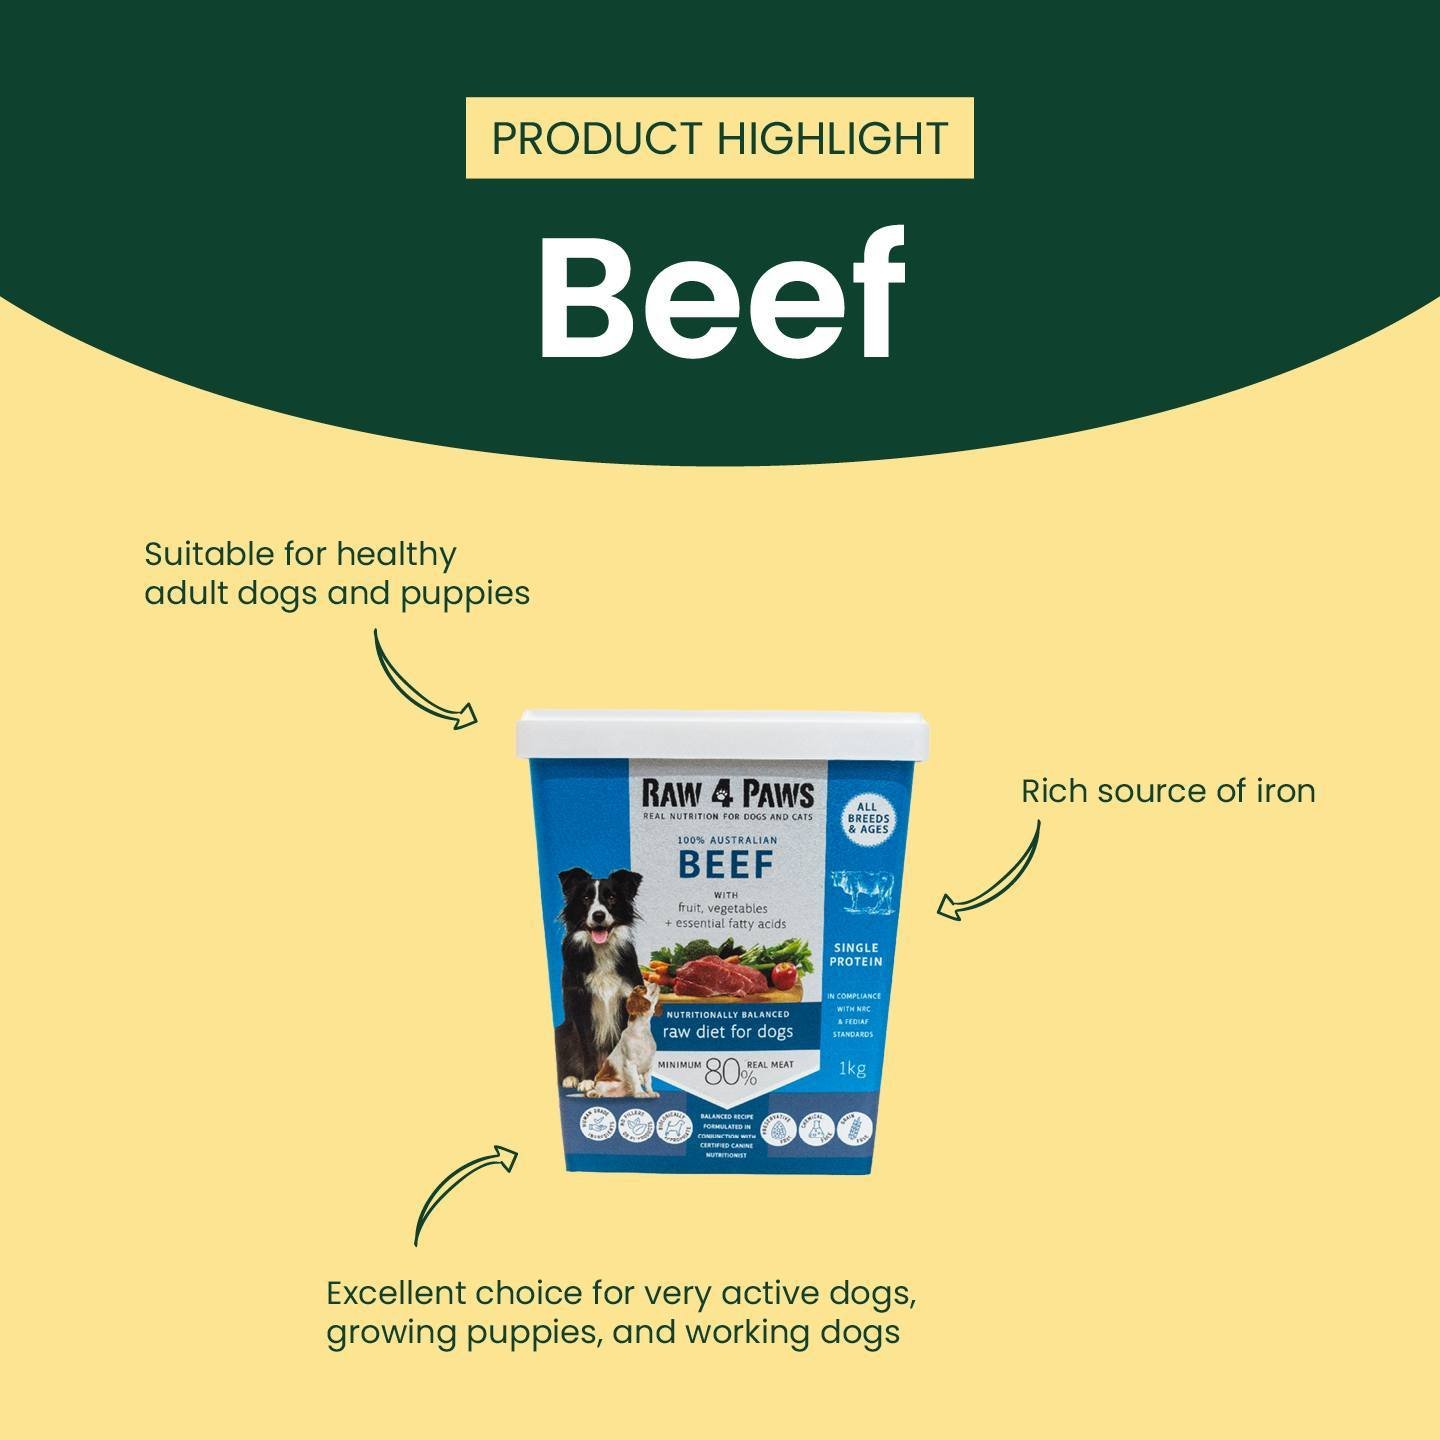 Beef is suitable for healthy adult dogs and puppies, being a rich source of iron! 💪 

The beef in RAW 4 PAWS comes from grass-fed animals and is an excellent choice for very active dogs, growing puppies, working or agility dogs and farm dogs that ar